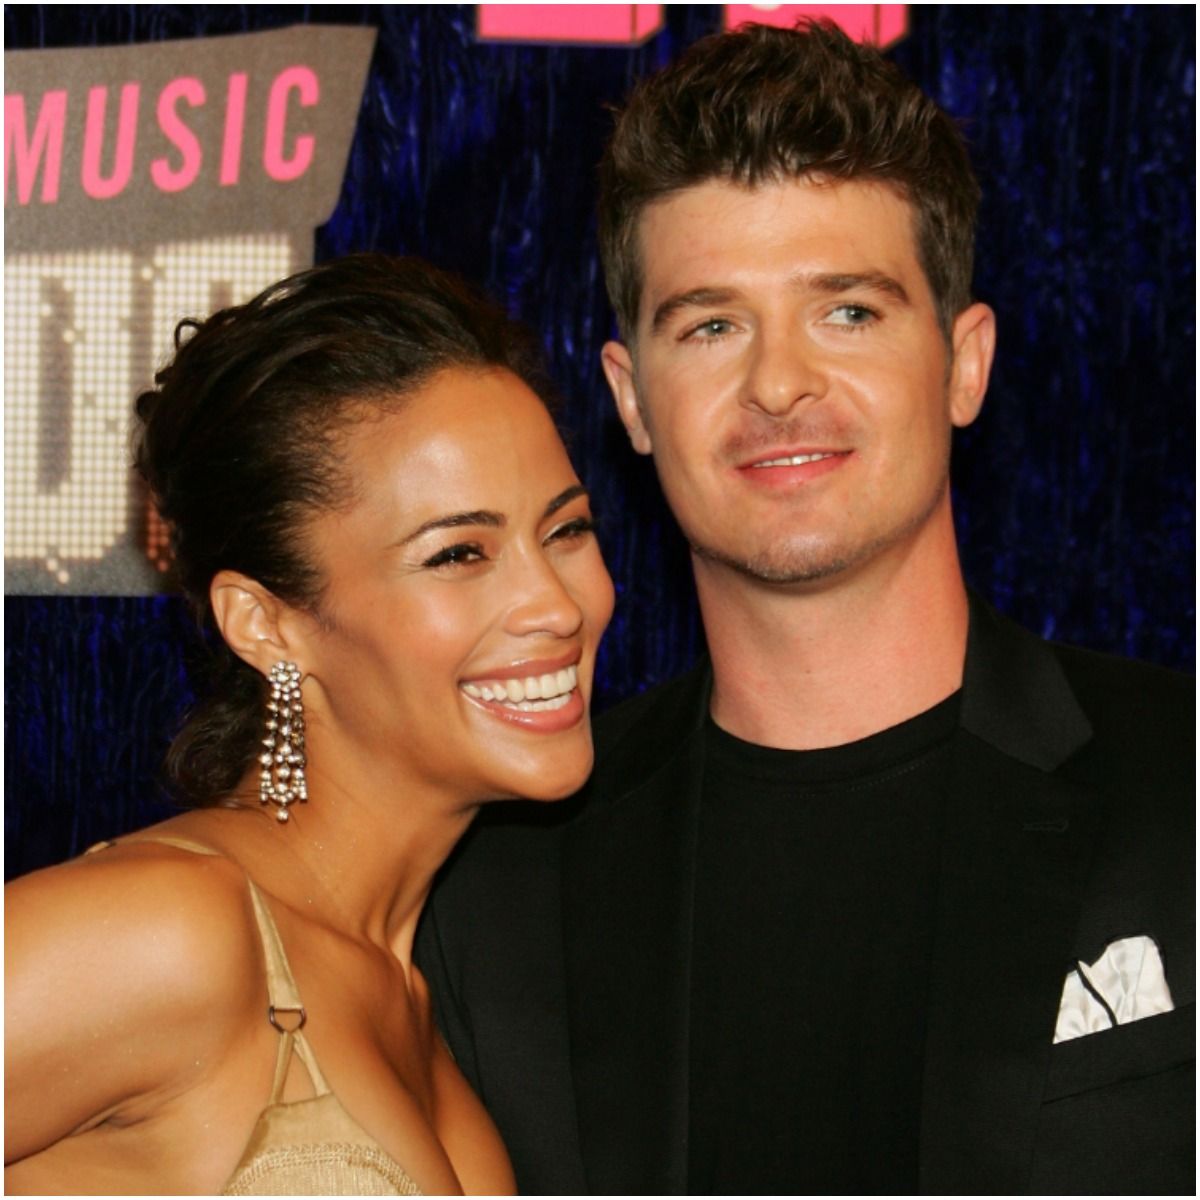 Robin Thicke and his wife Paula Patton